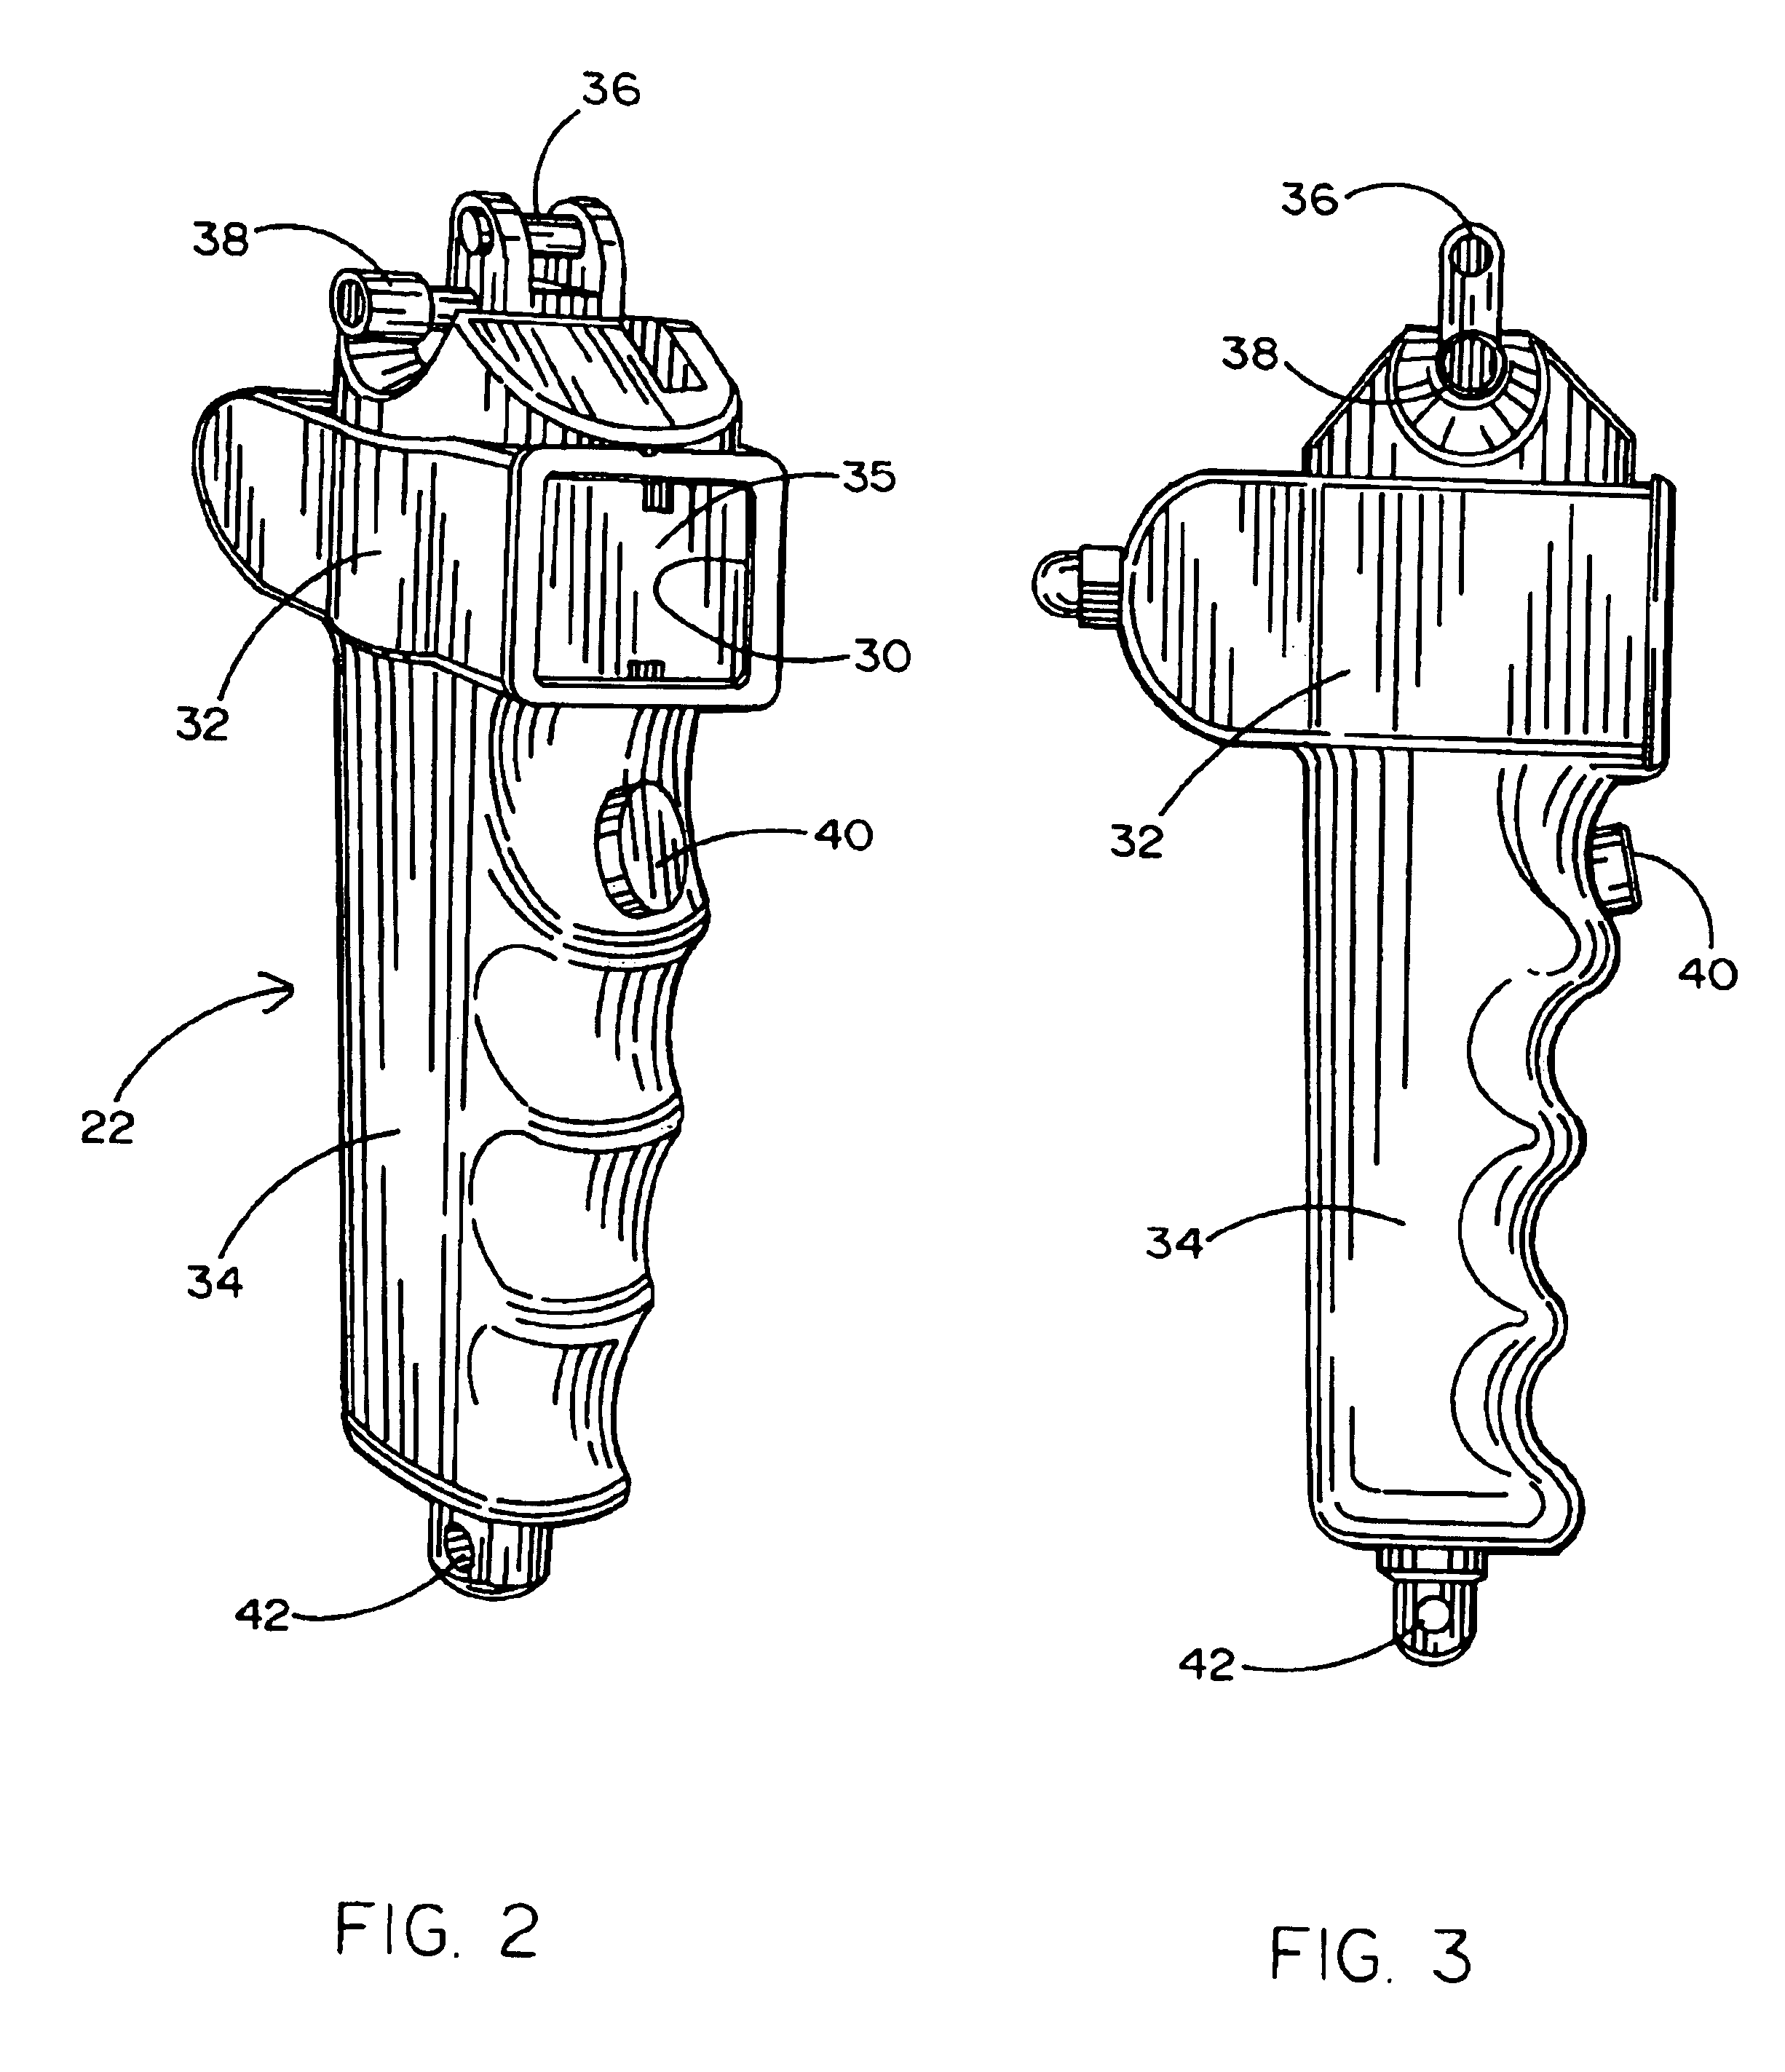 Electric discharge weapon for use as forend grip of rifles